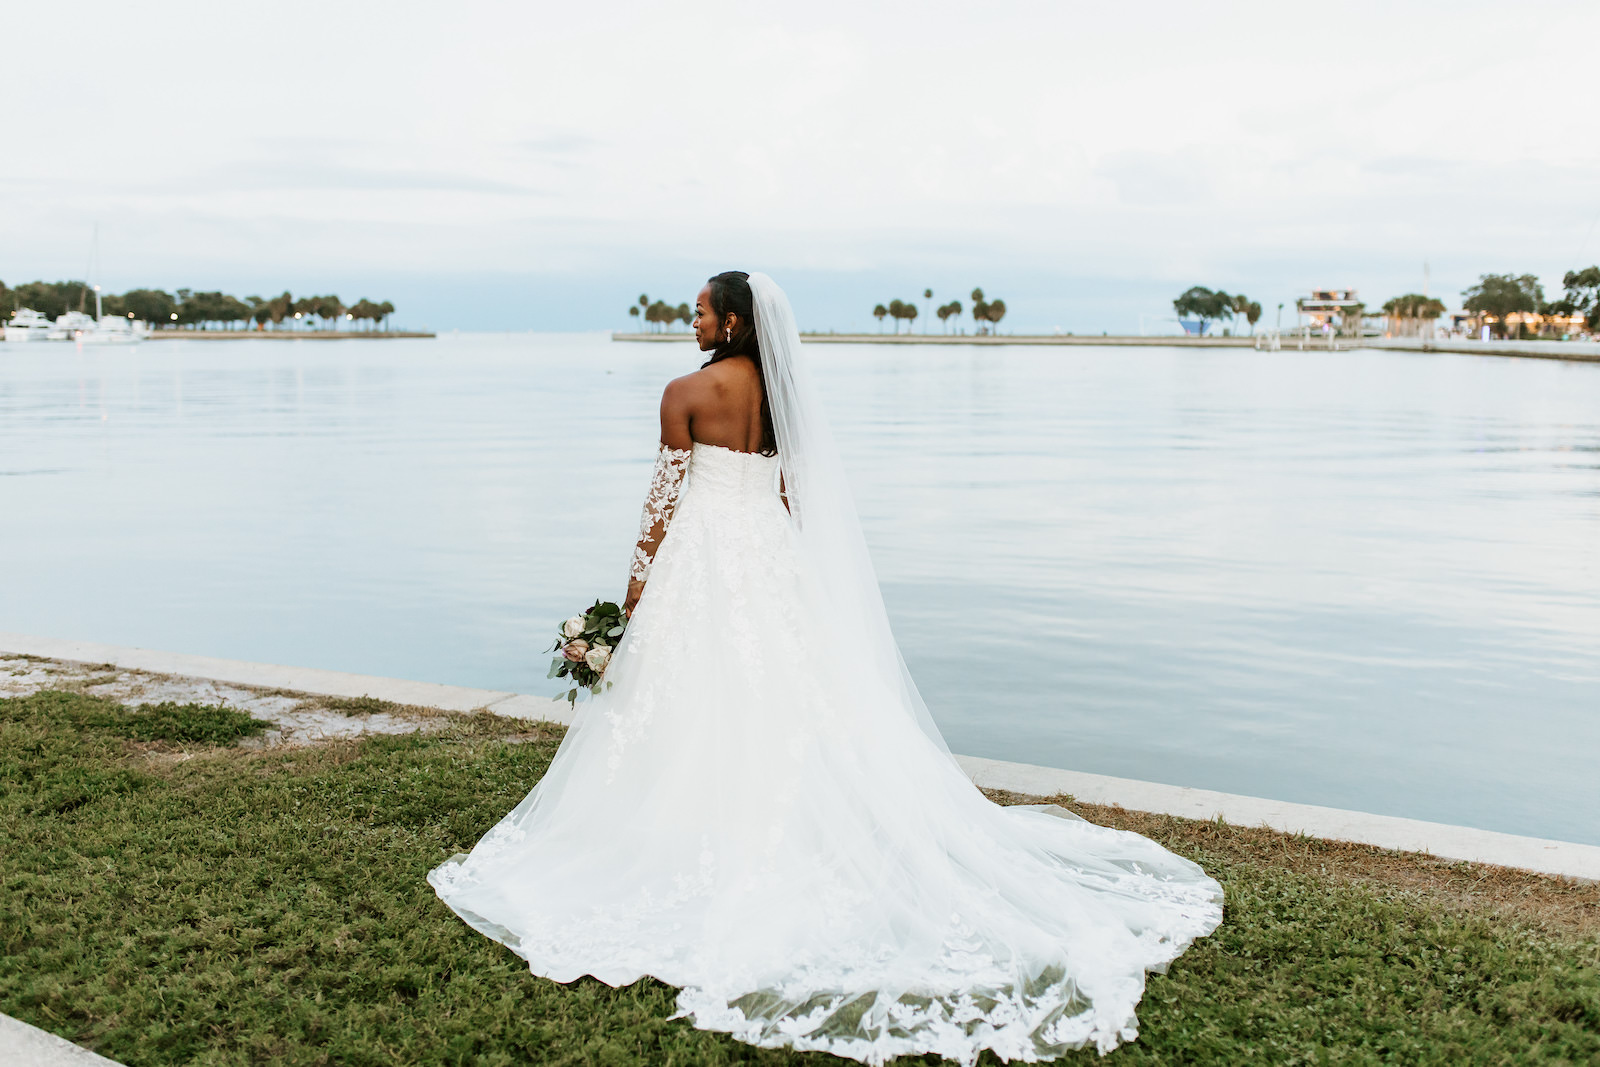 Waterfront Outdoor Bridal Portrait in Downtown St. Pete | Ballgown Lace Sweetheart Neckline Tulle Wedding Dress with Sheer Illusion Lace Sleeves and Cathedral Veil